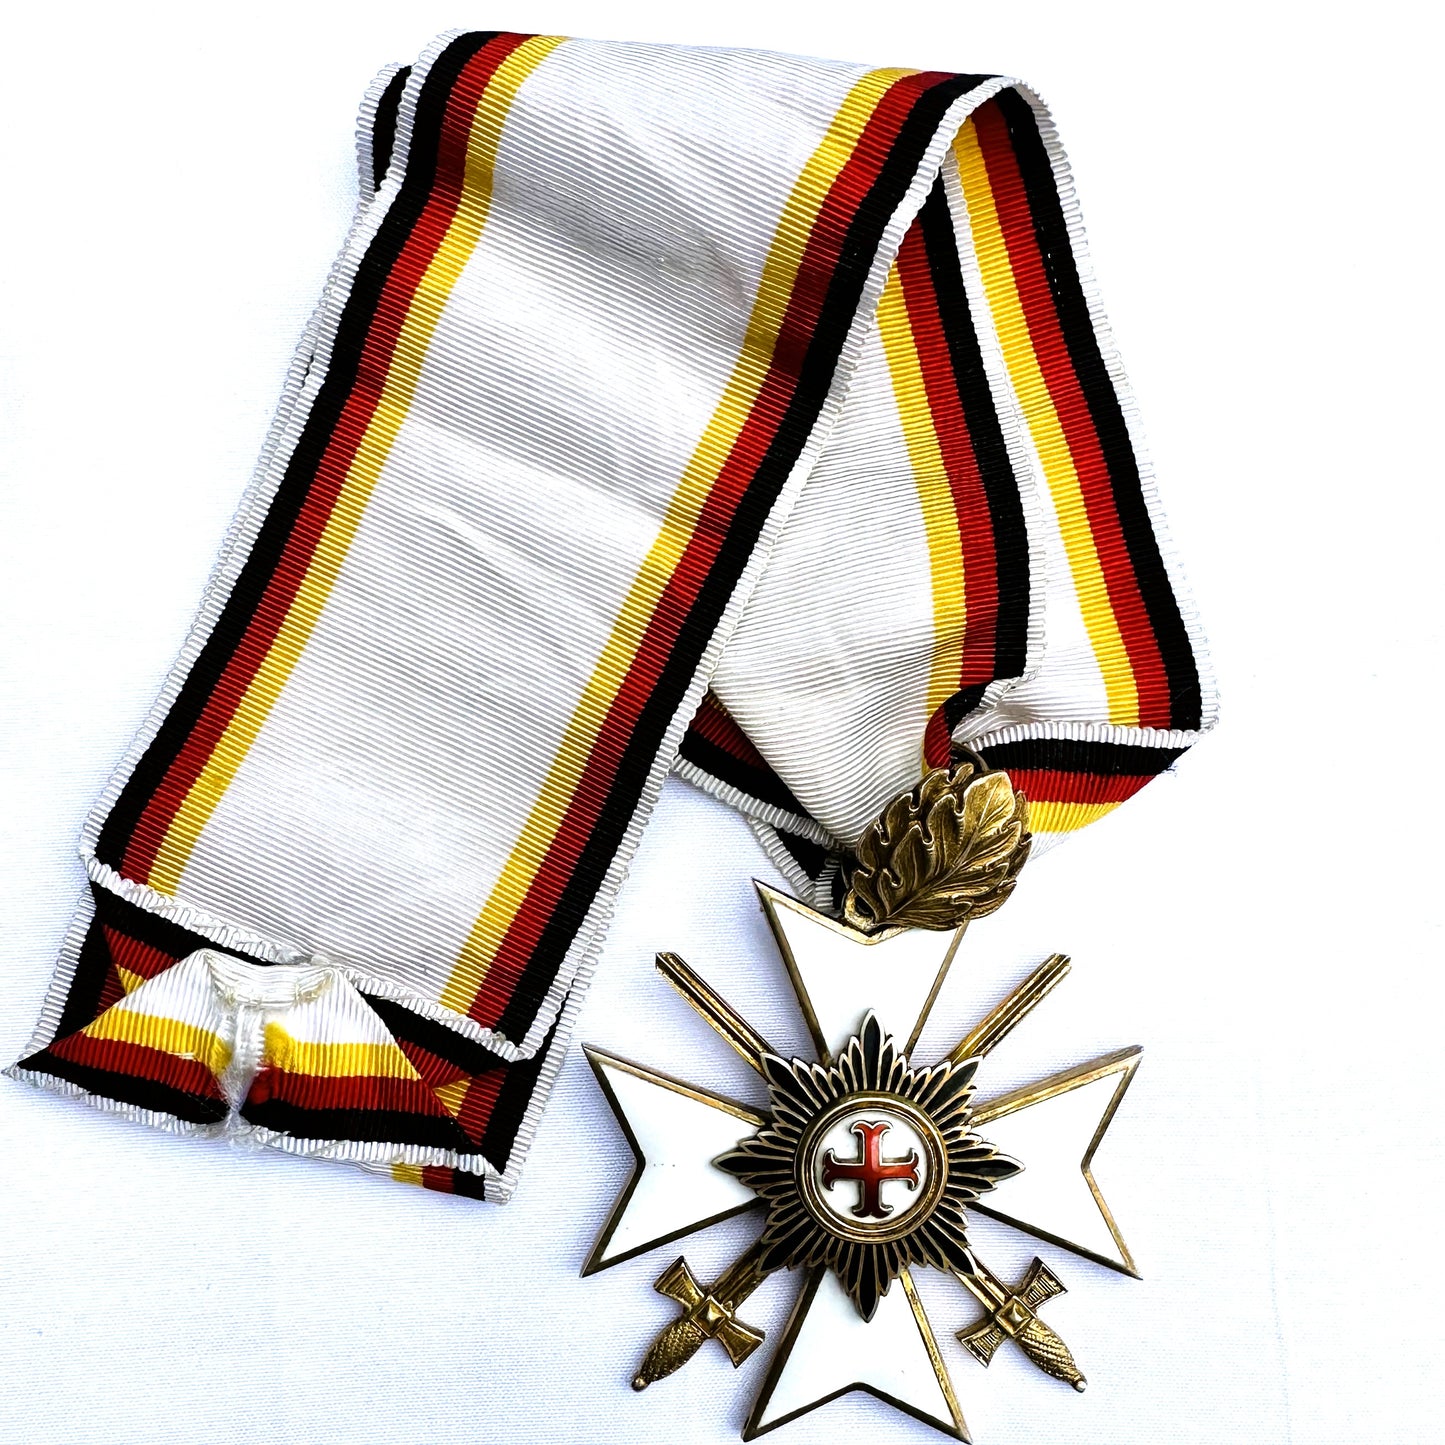 Order of the Crown - Commander's Cross with Swords and Oak Leaves - Württemberg